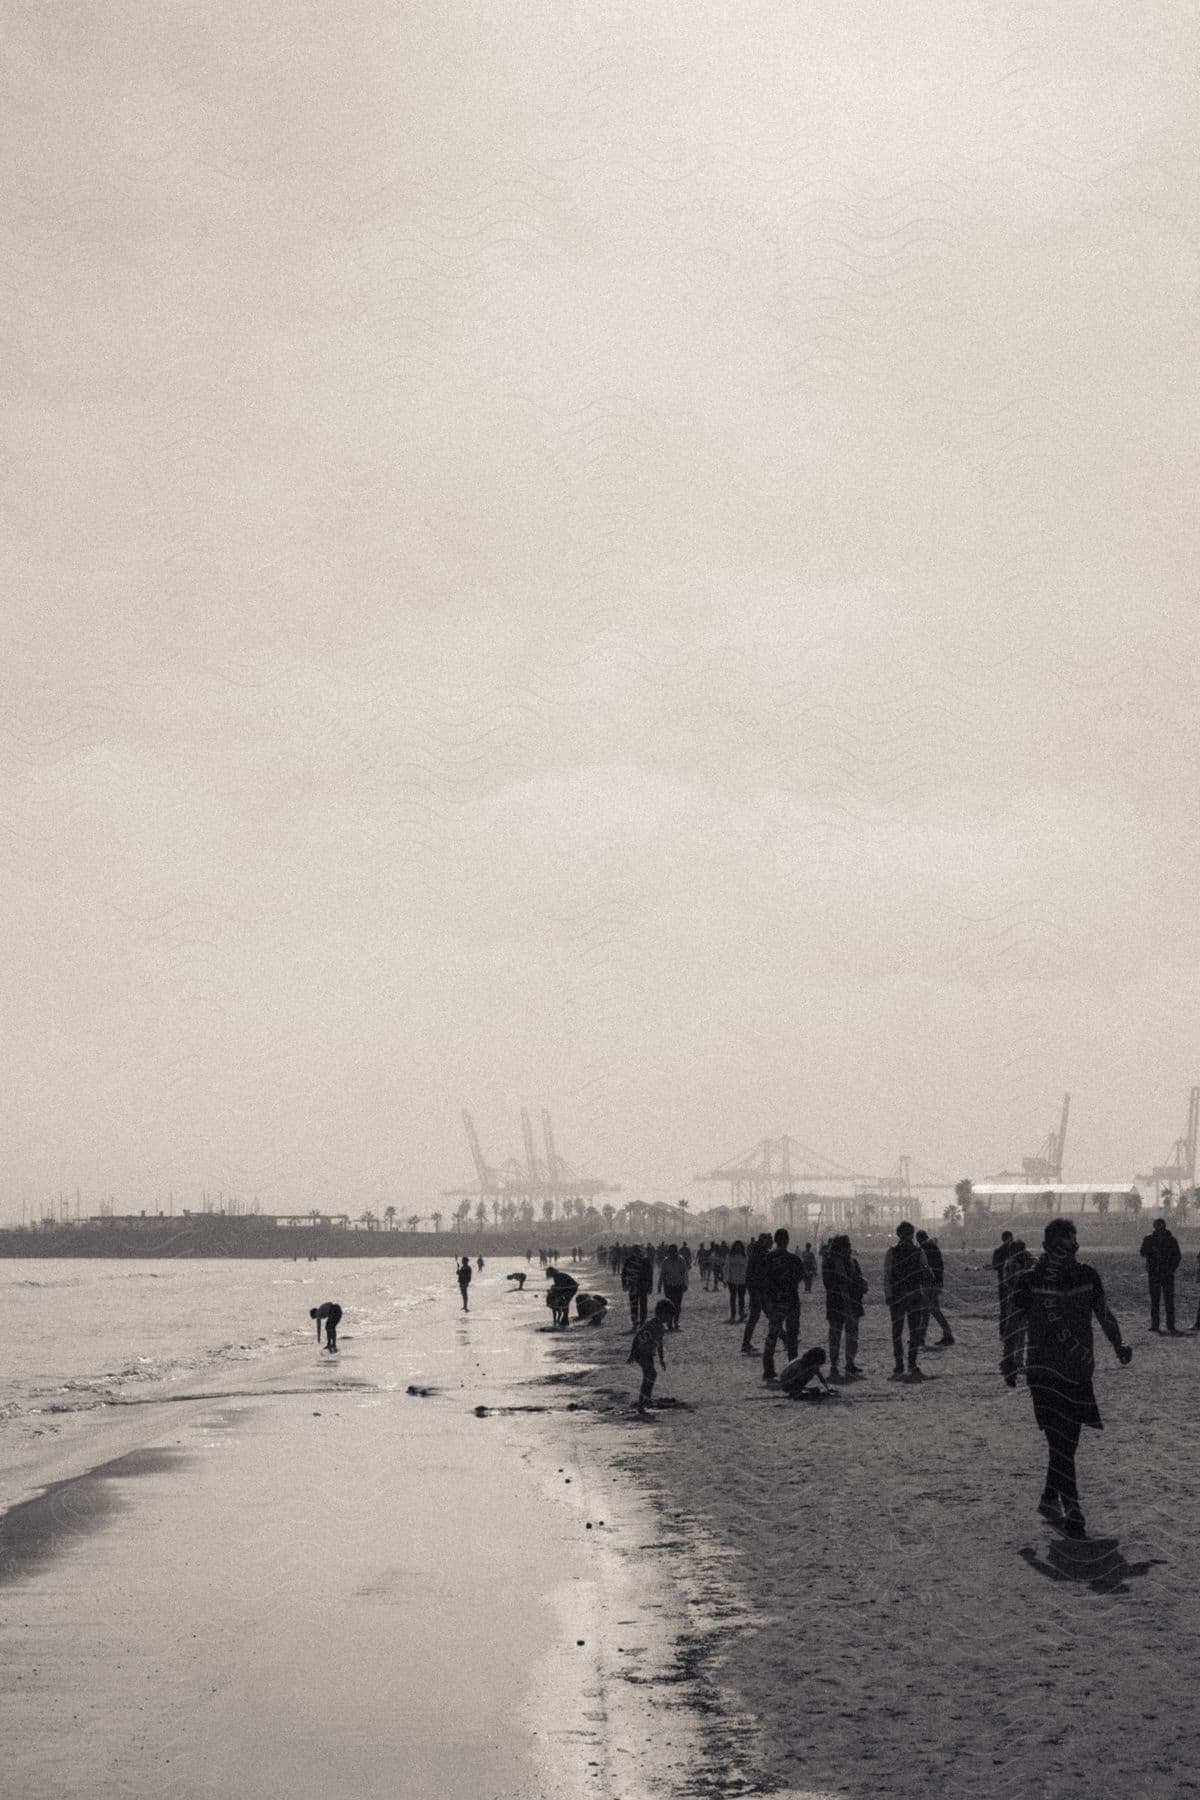 Silhouettes of people walking along the beach